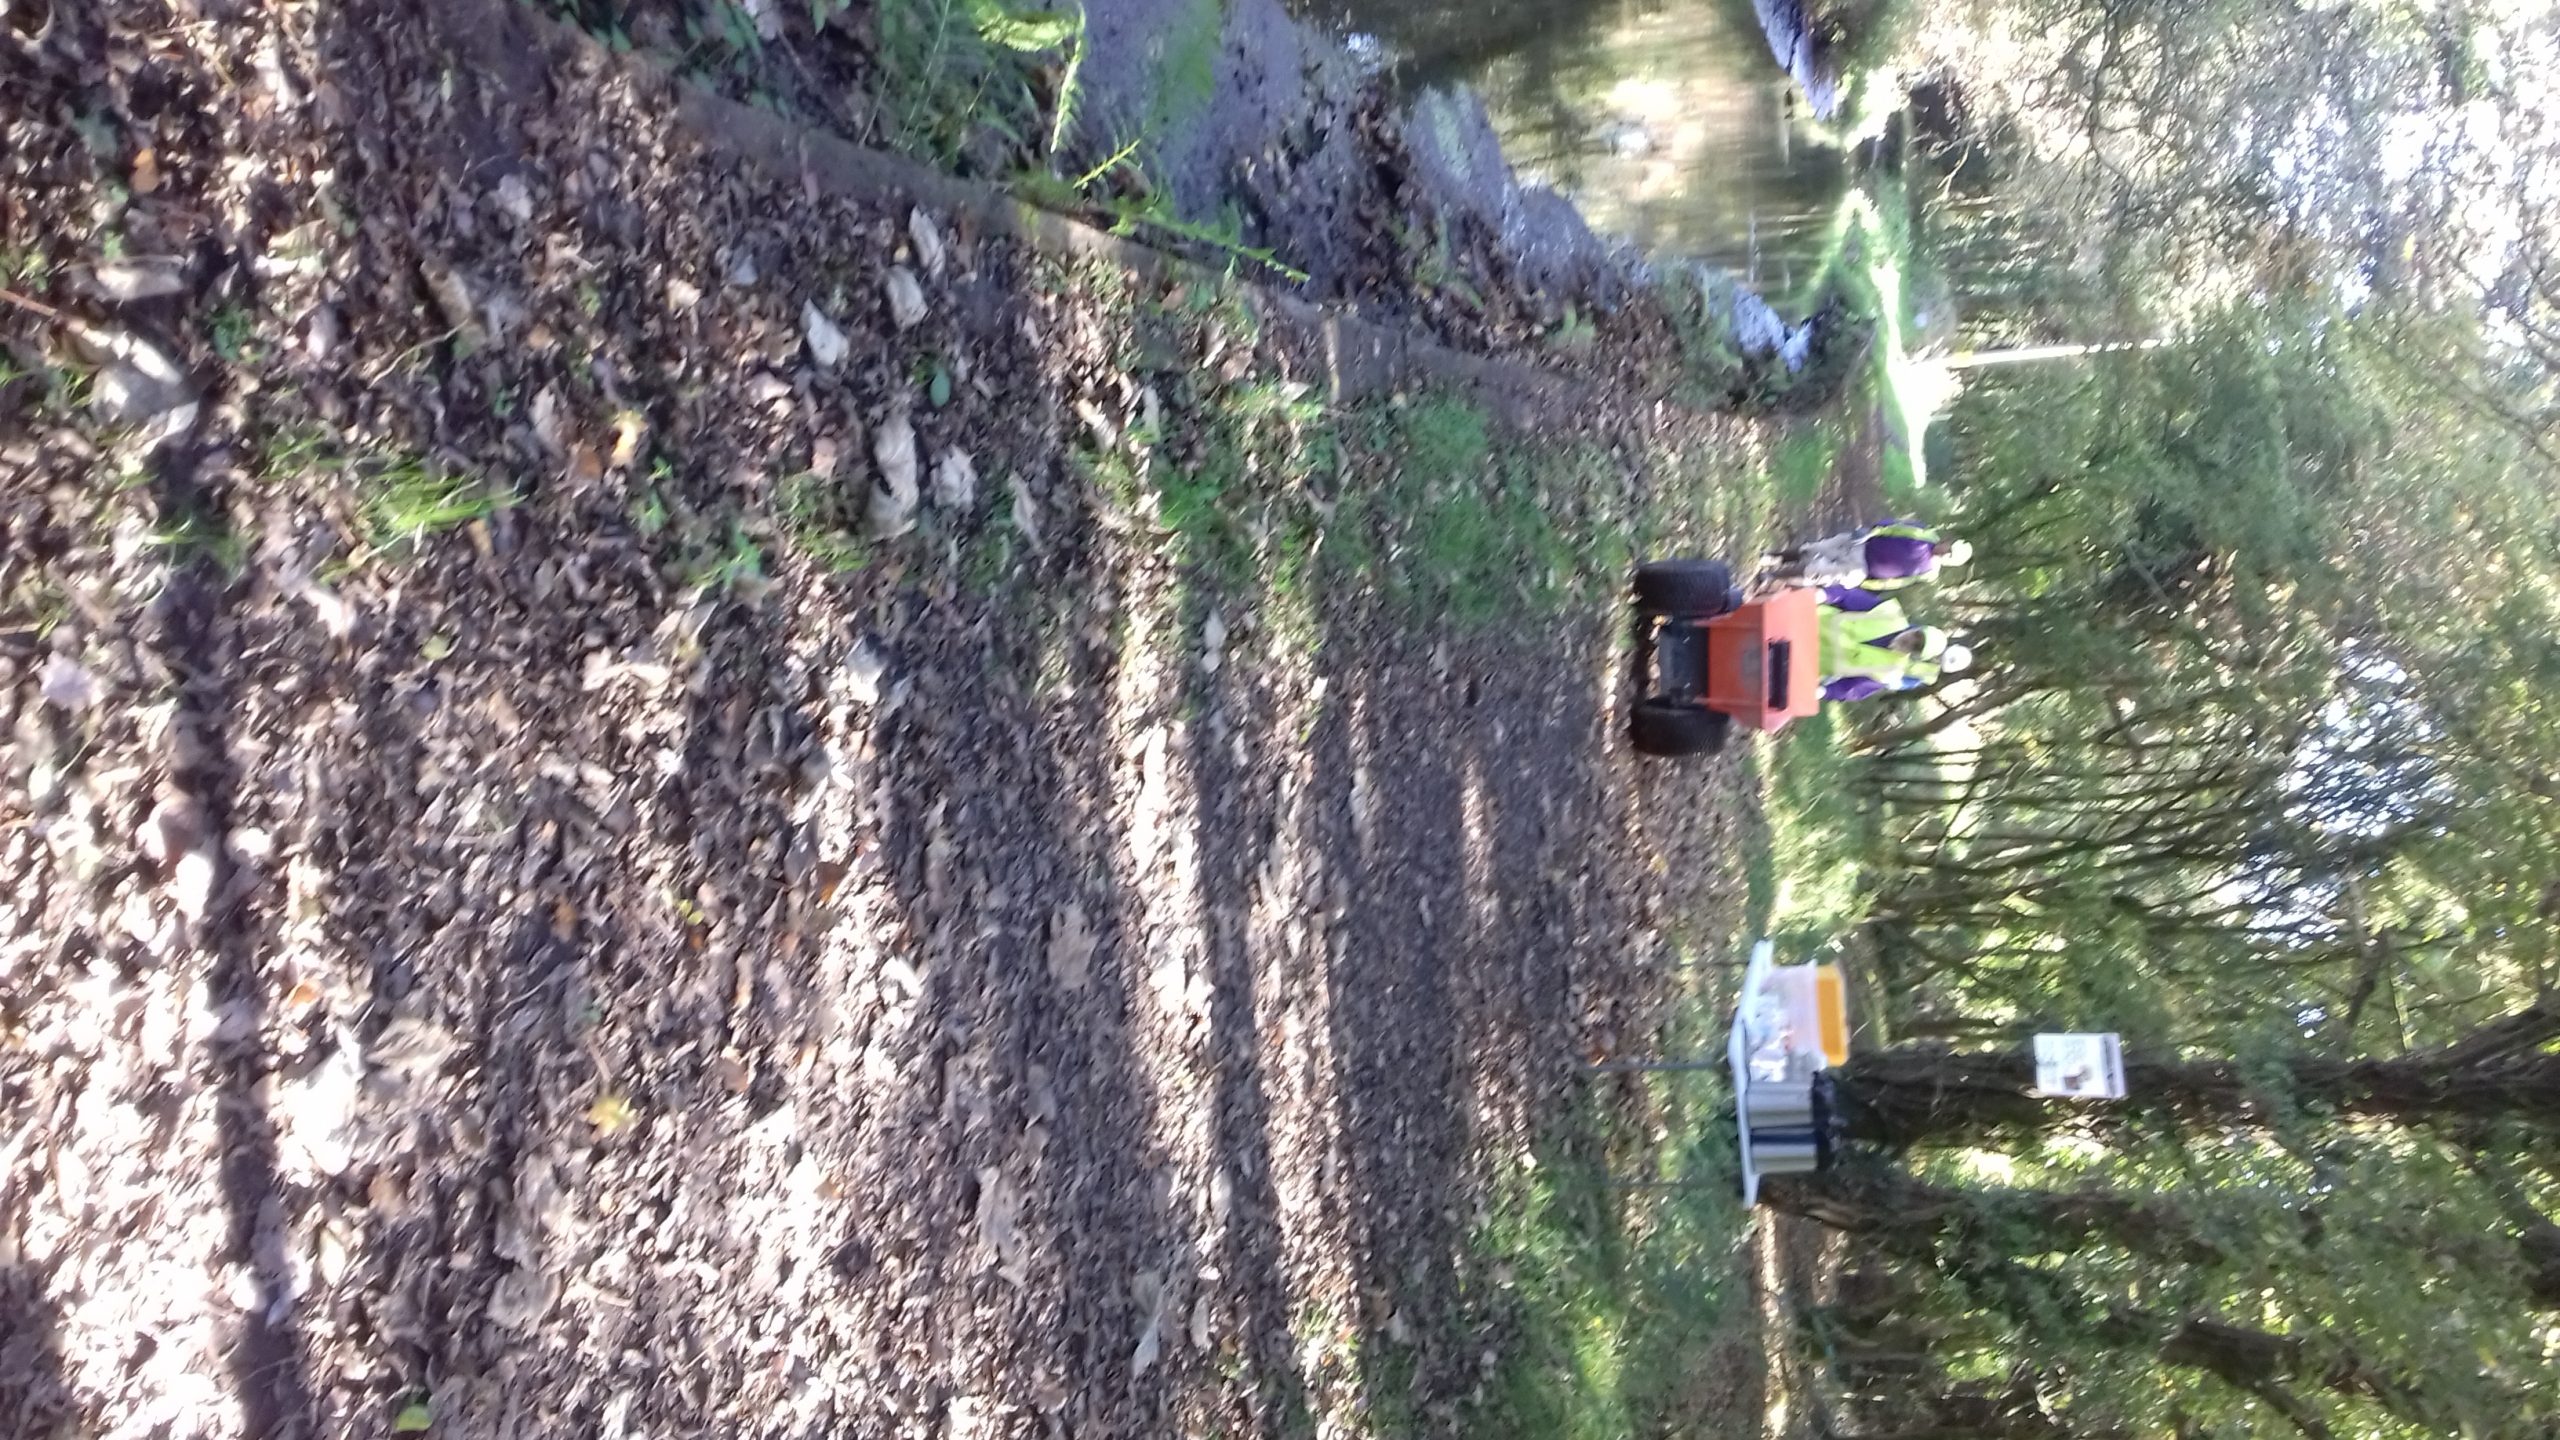 THE LONG HAUL DOWN THE TOWPATH. JOHN AT THE HELM OFF THE DUMPER TRUCK